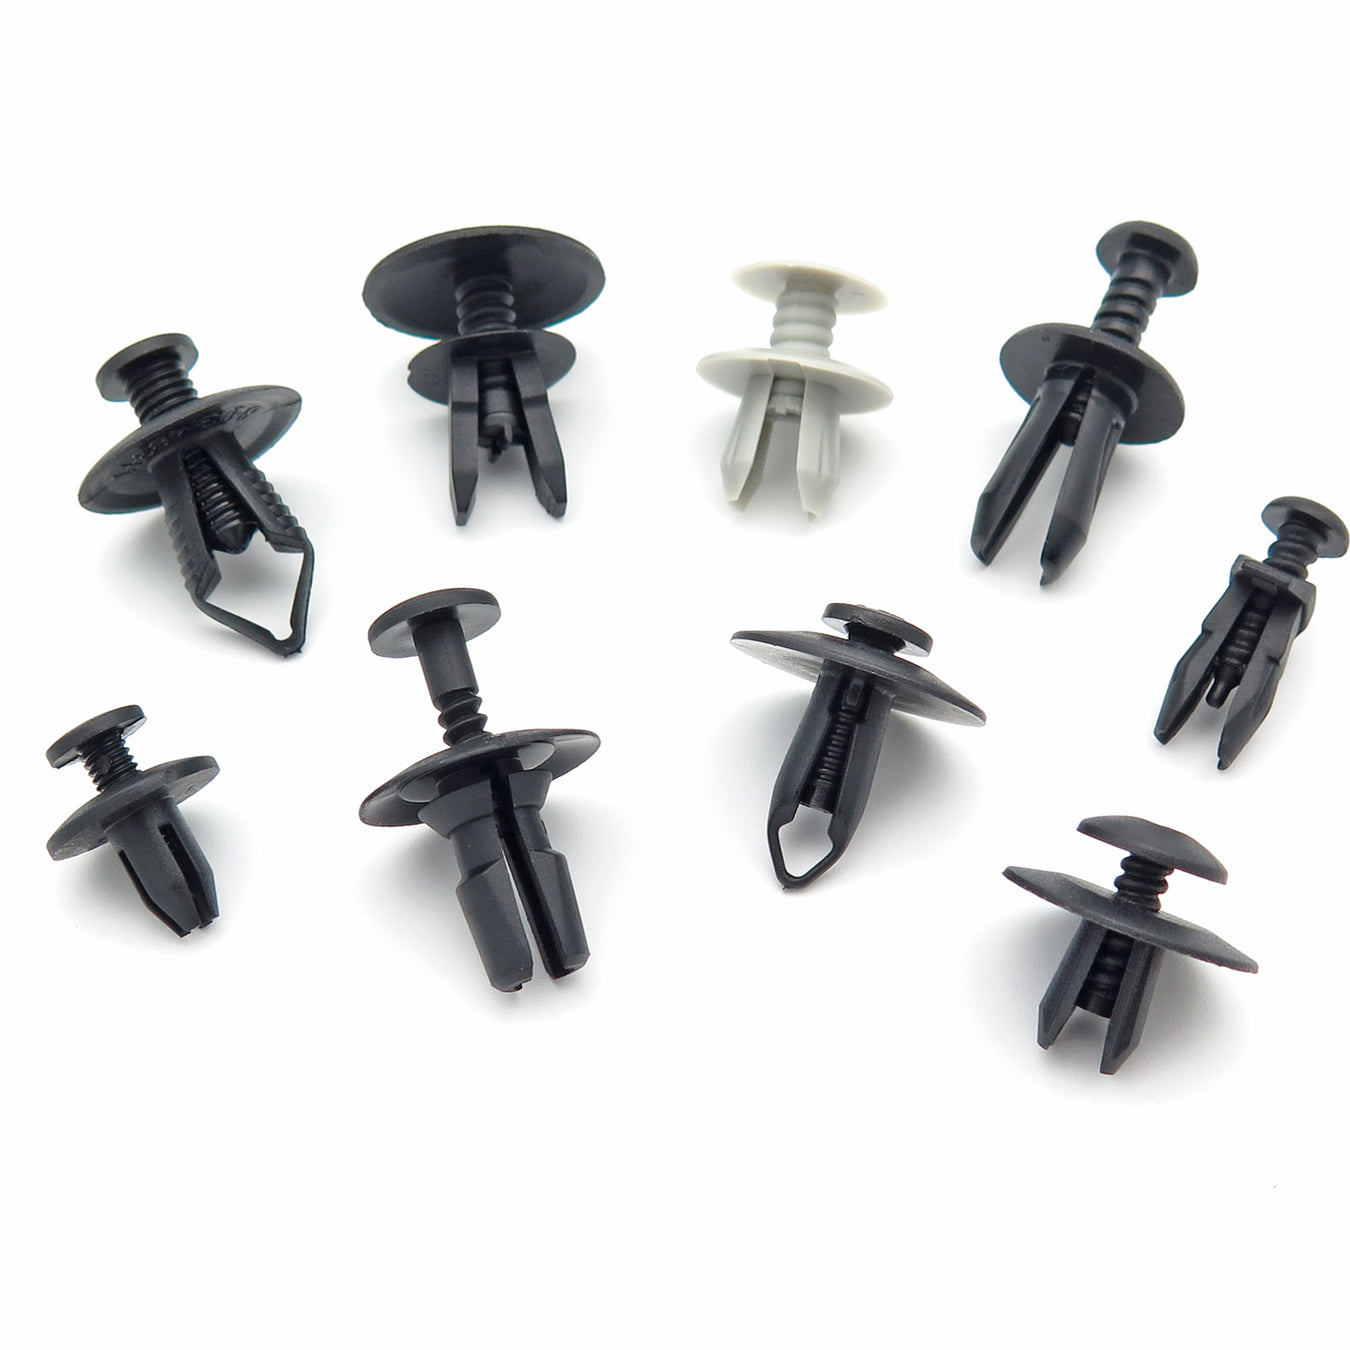 Car Trim Clips & Fasteners - Trade Prices 